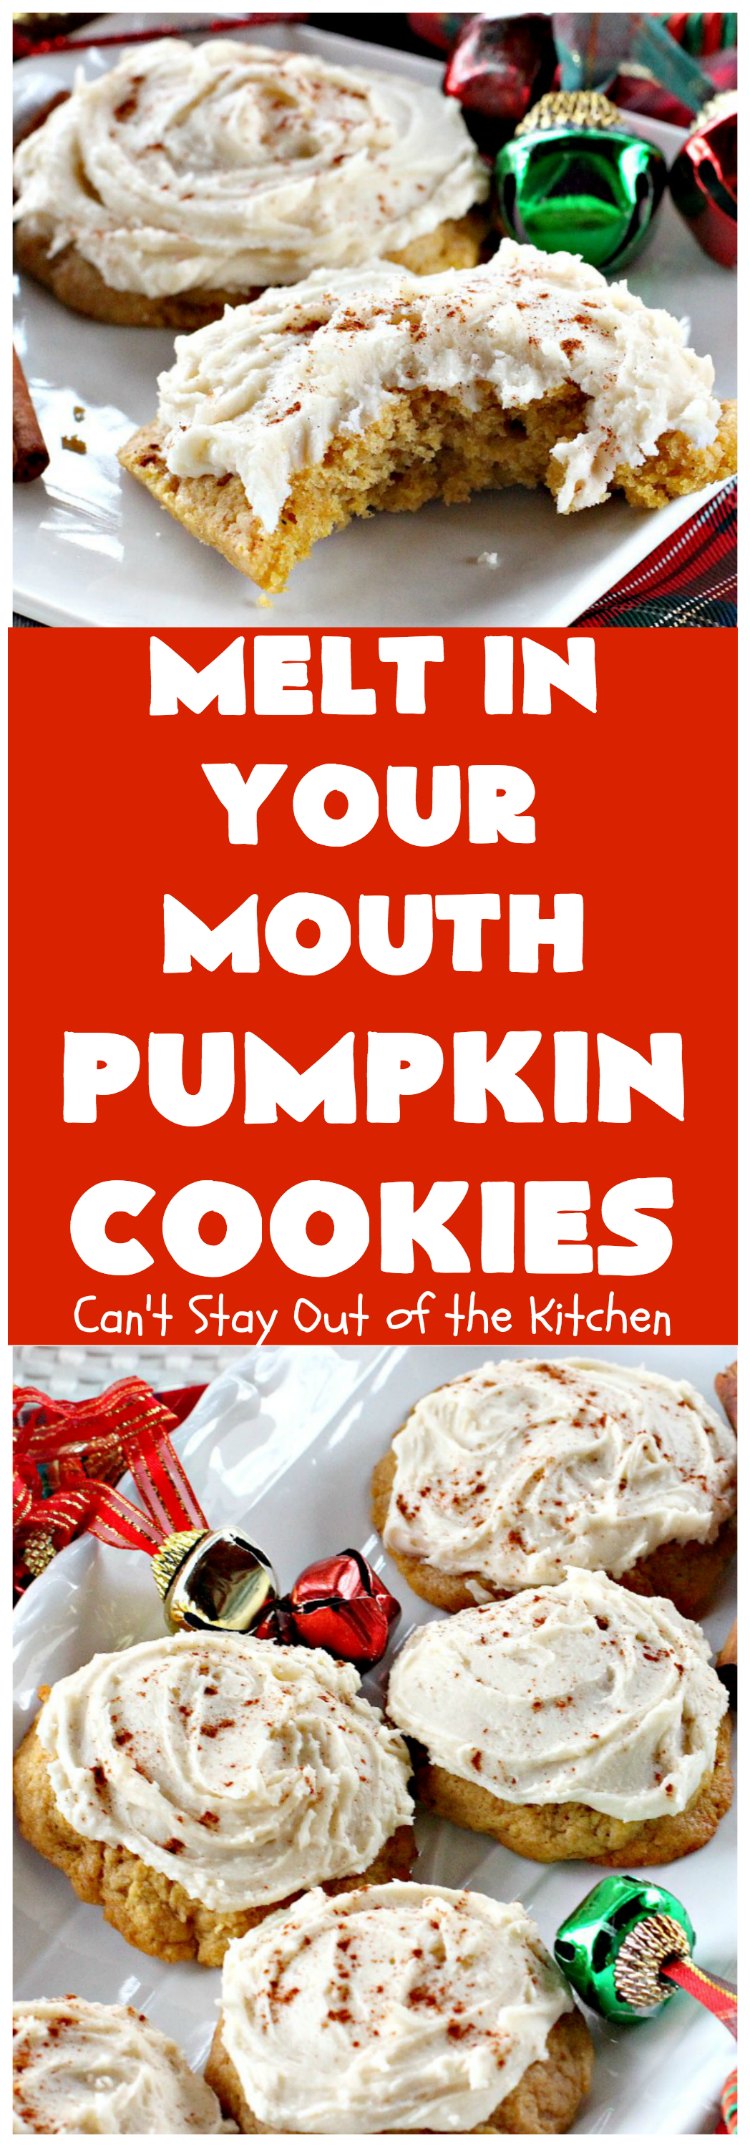 Melt in Your Mouth Pumpkin Cookies | Can't Stay Out of the Kitchen